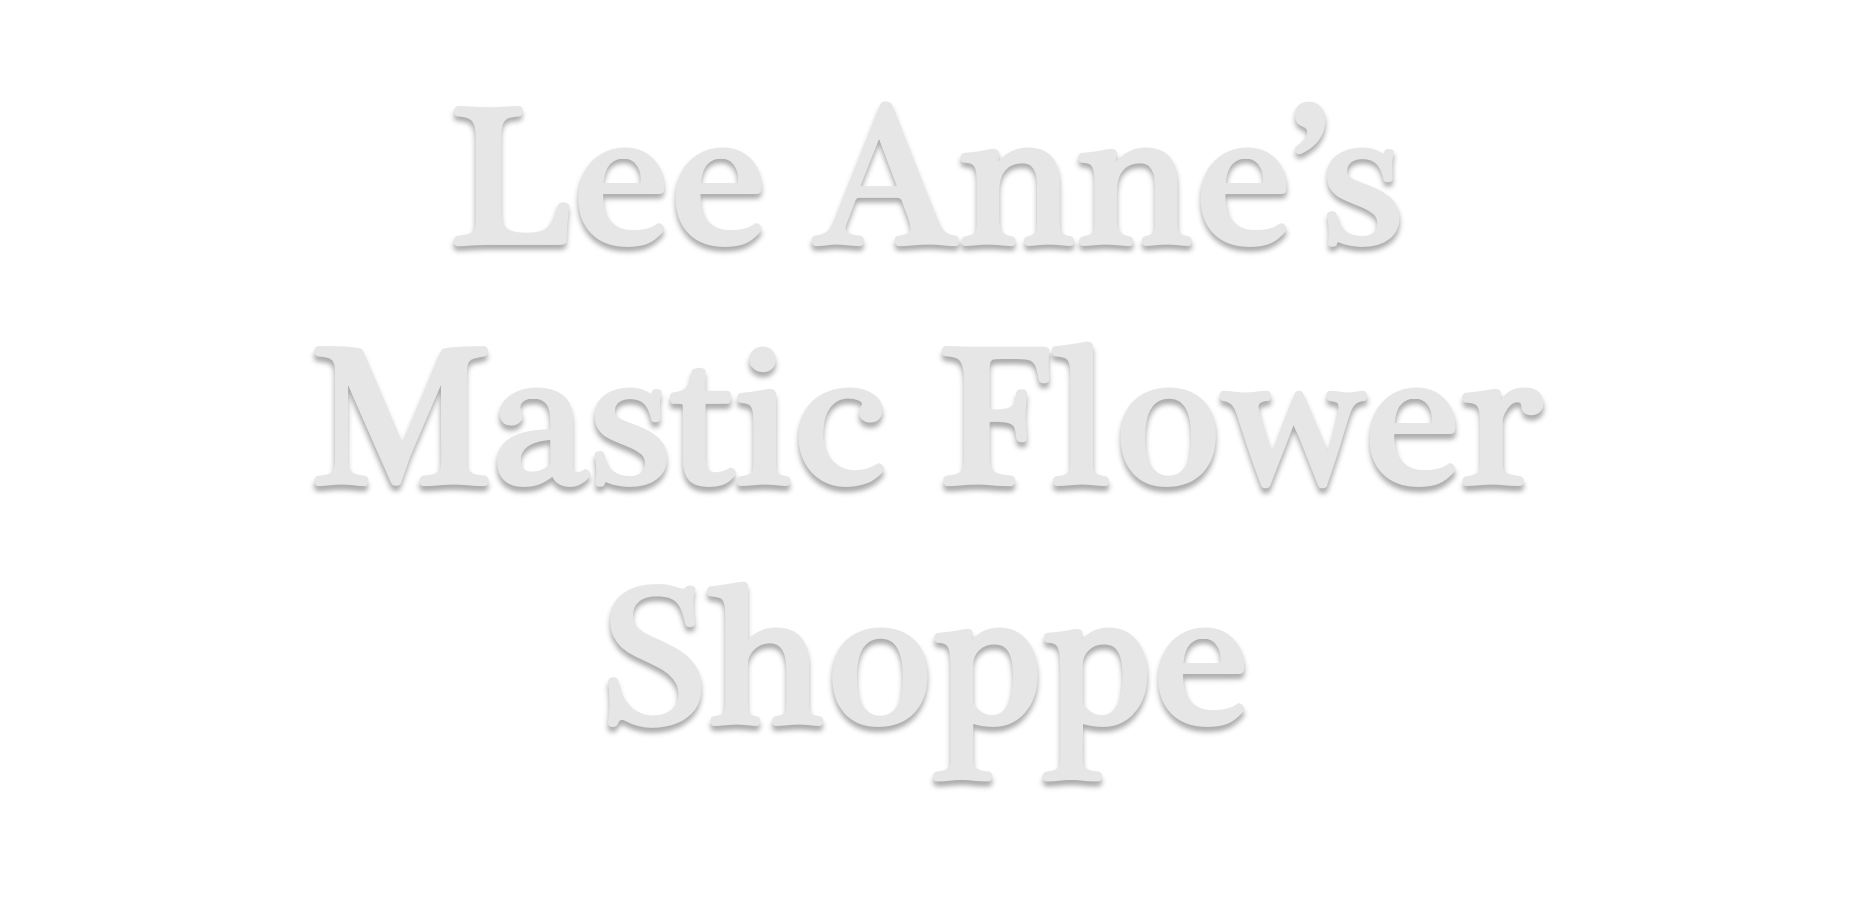 Lee Anne's Mastic Flower Shoppe - Mastic, NY 11950 - (631)399-6464 | ShowMeLocal.com